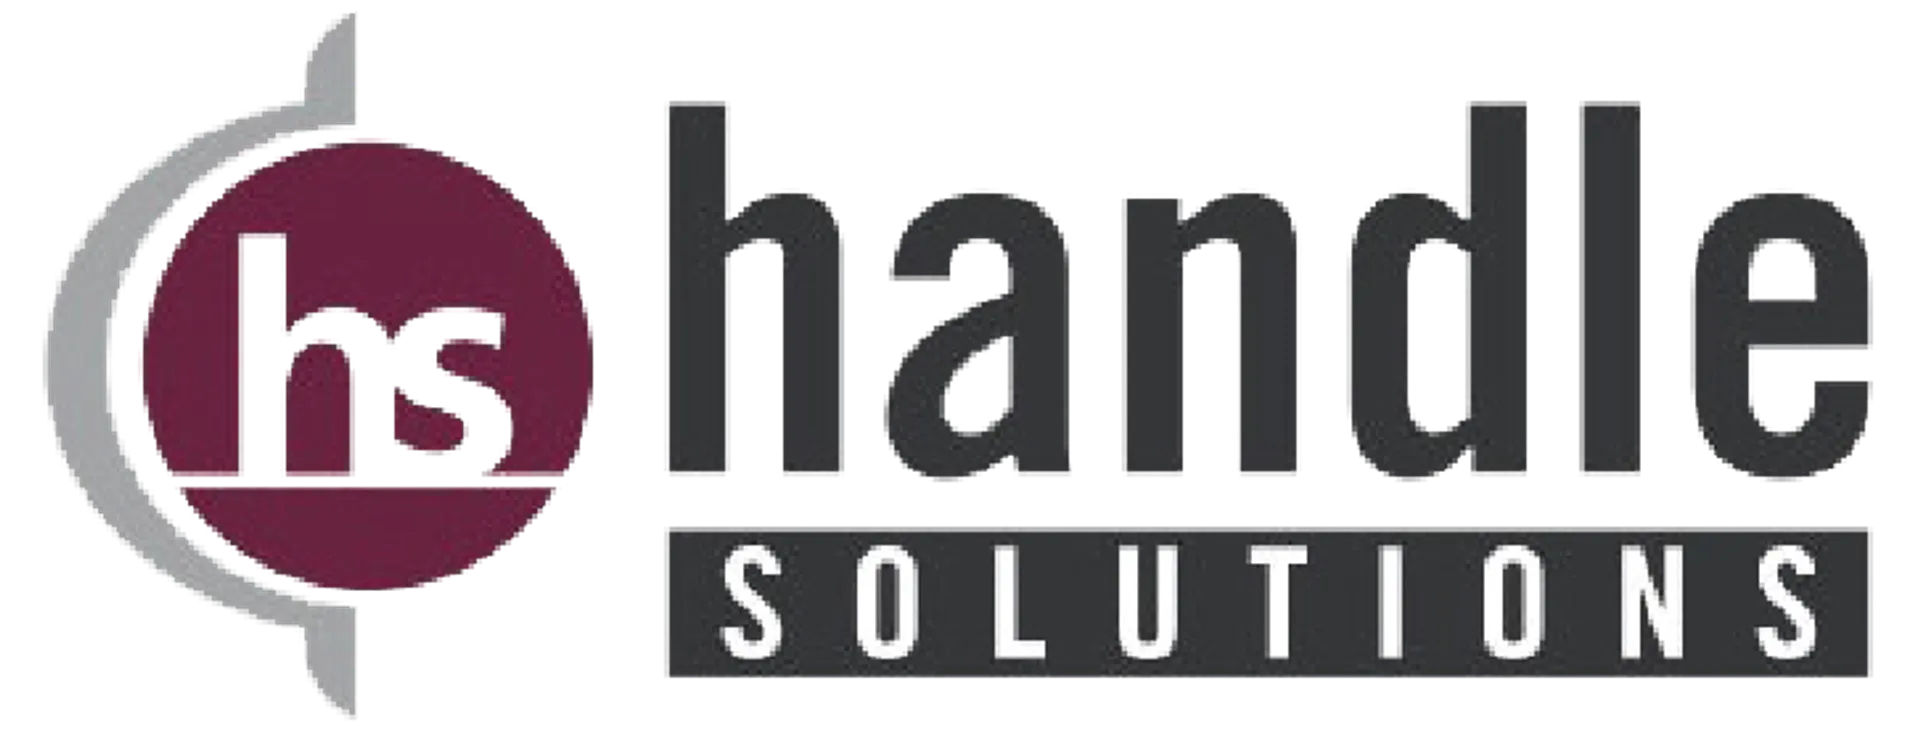 HANDLE SOLUTIONS logo. Current weekly ad